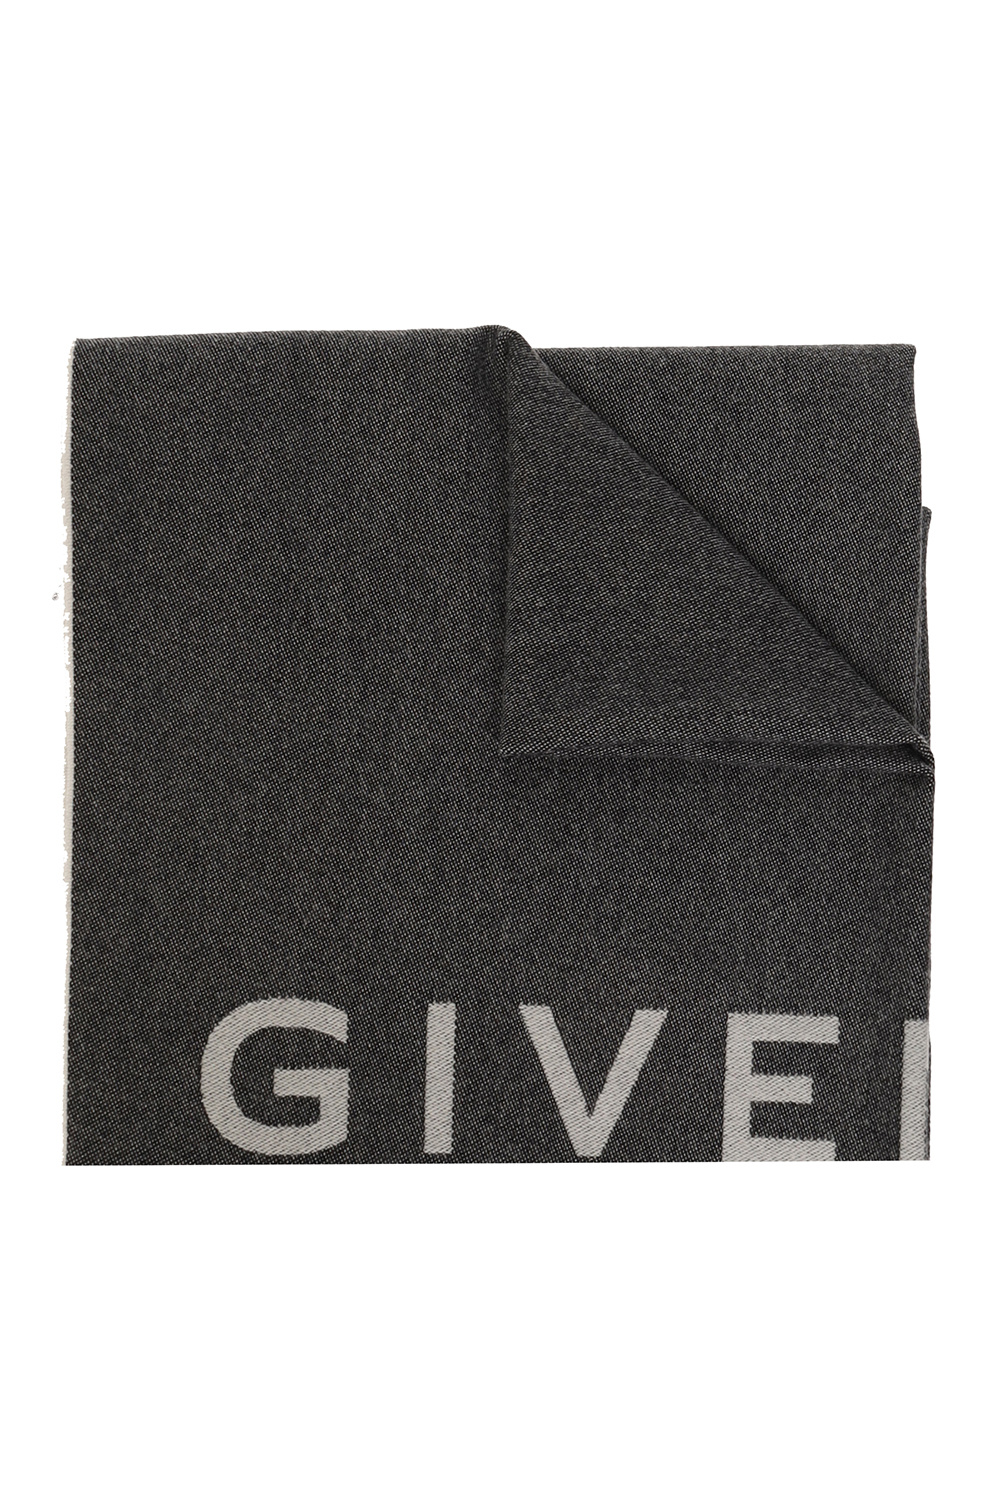 Givenchy Givenchy Fein gestrickter Pullover Schwarz